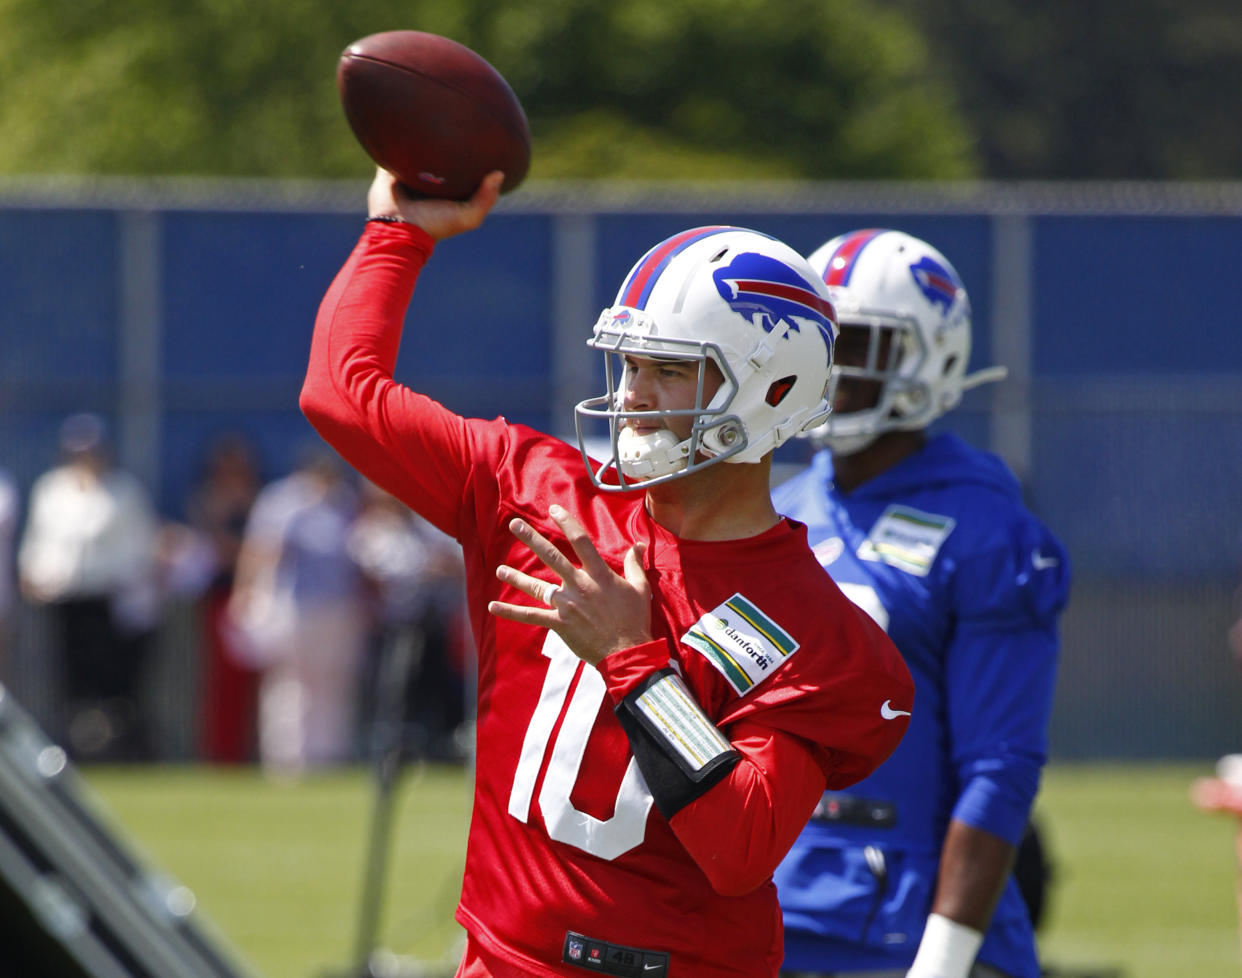 Buffalo Bills quarterback A.J. McCarron suffered a hairline fracture in his collarbone on Friday in their preseason game against the Cleveland Browns. (AP Photo/Jeffrey T. Barnes)